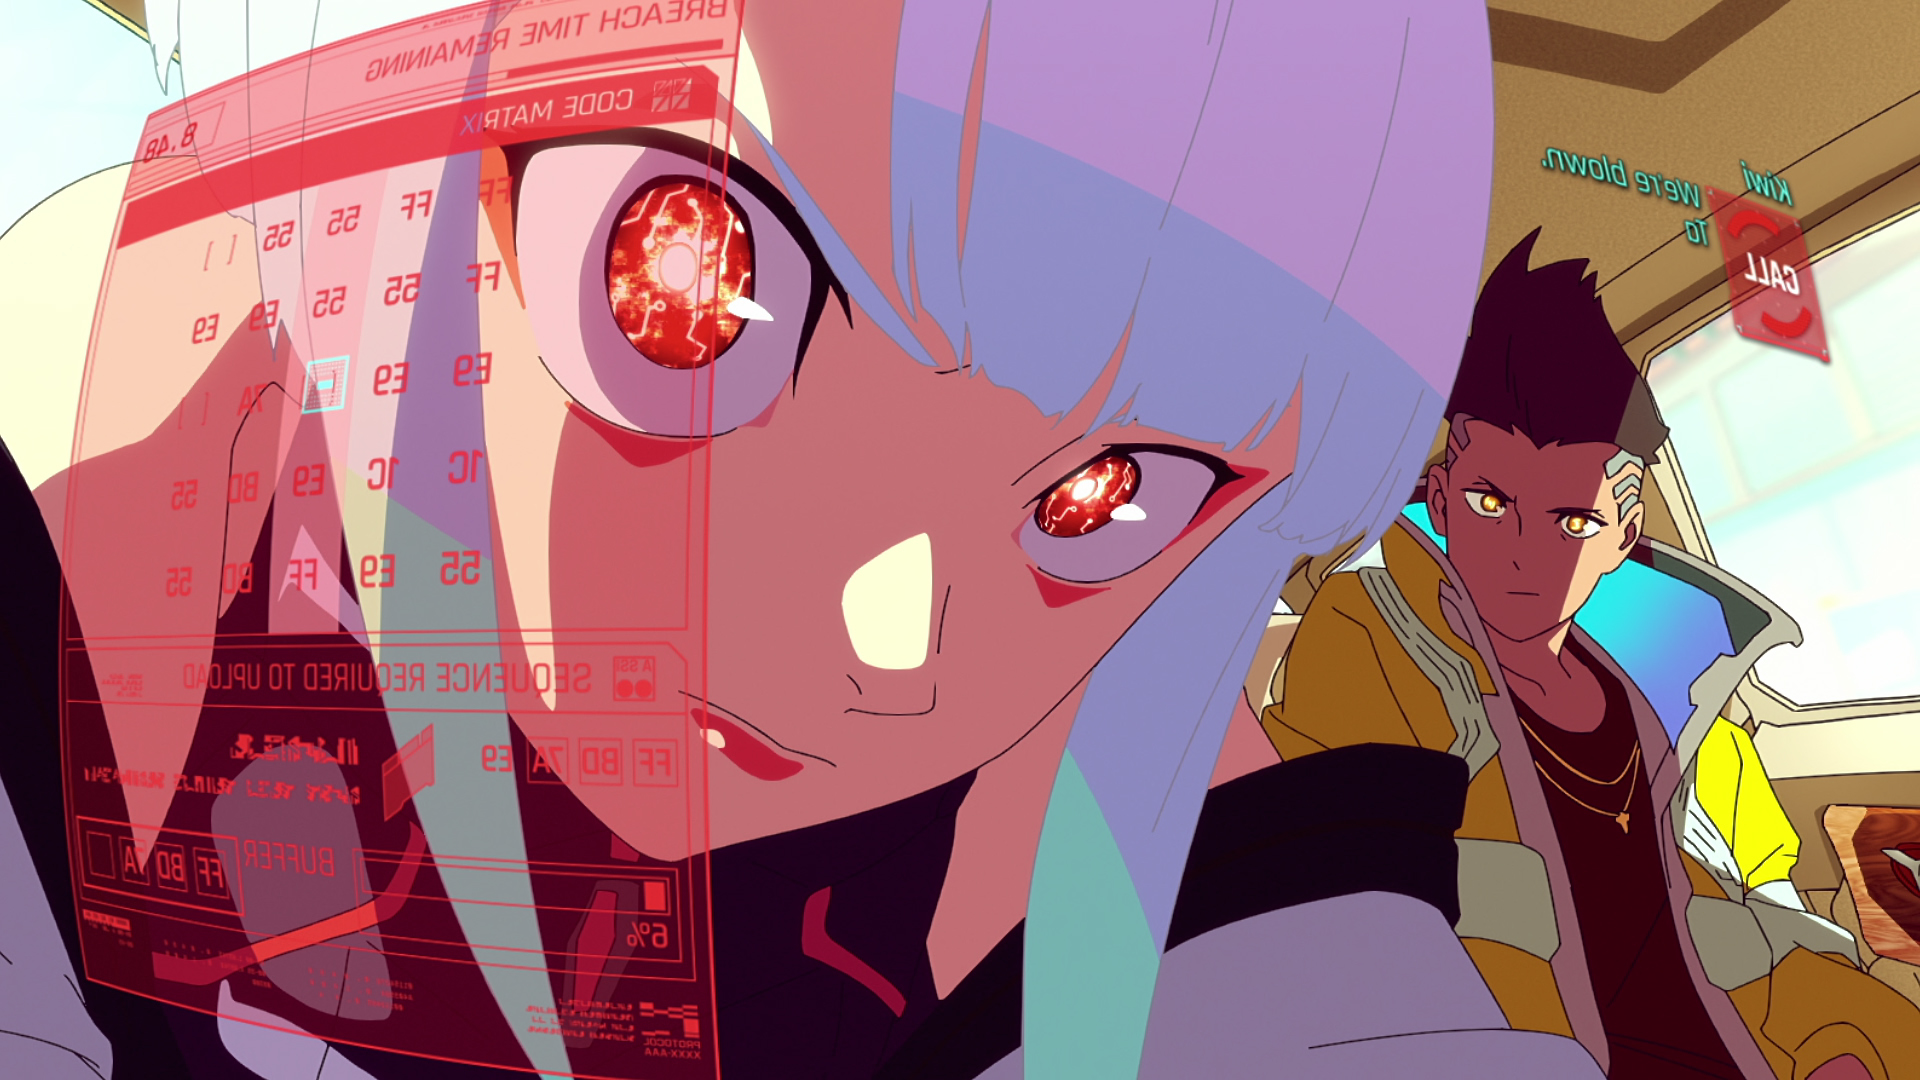 Cyberpunk: Edgerunners Anime Goes All In With Intense, New Trailer (NSFW)